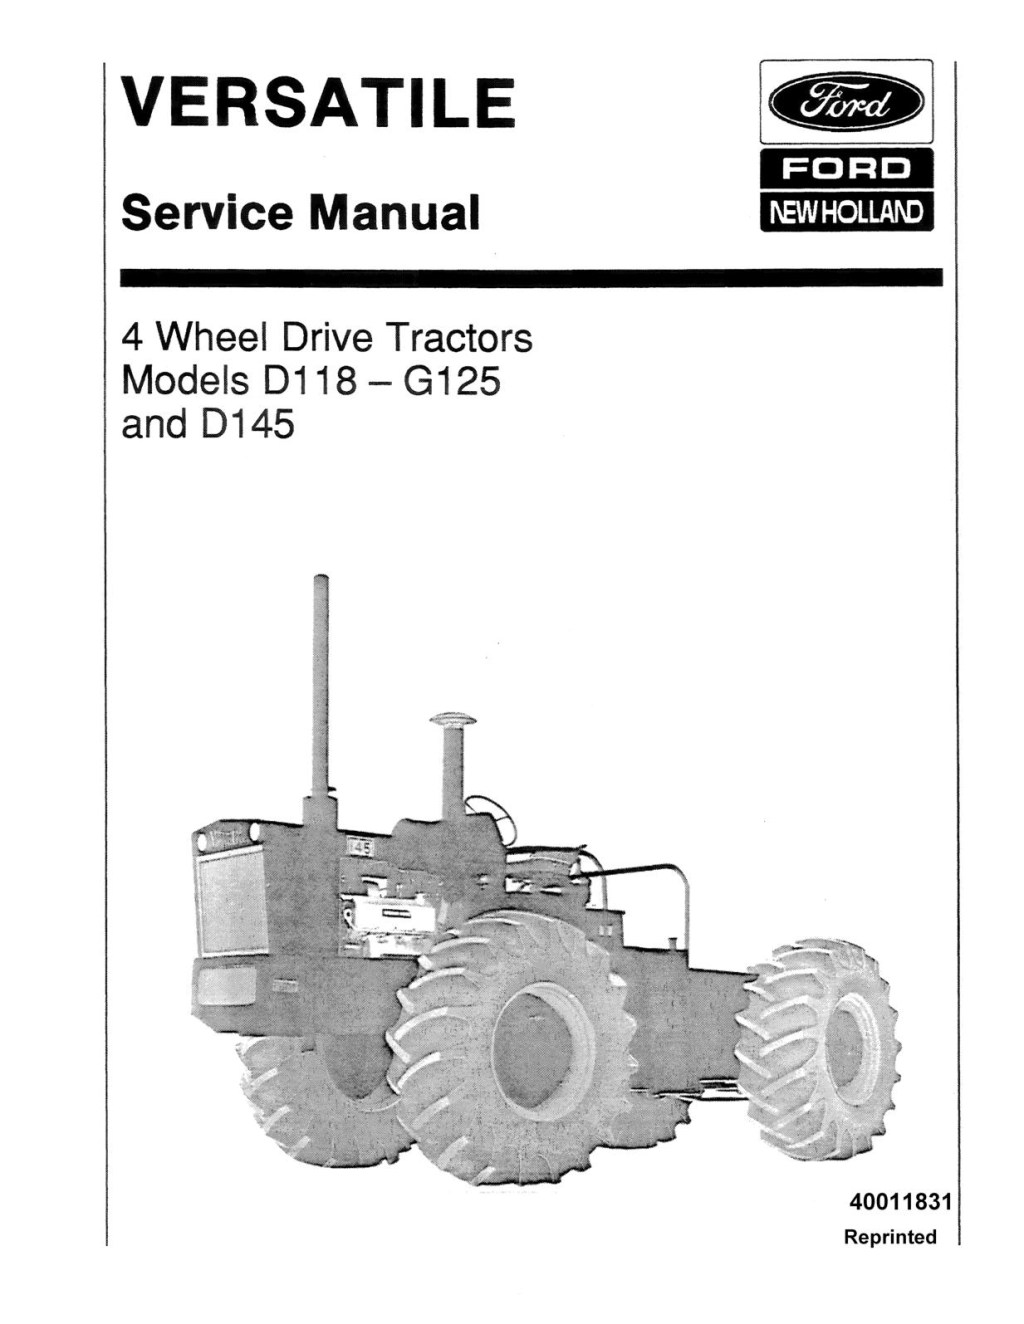 Picture of: Calaméo – Ford New Holland  Wheel Drive Tractor Models D G